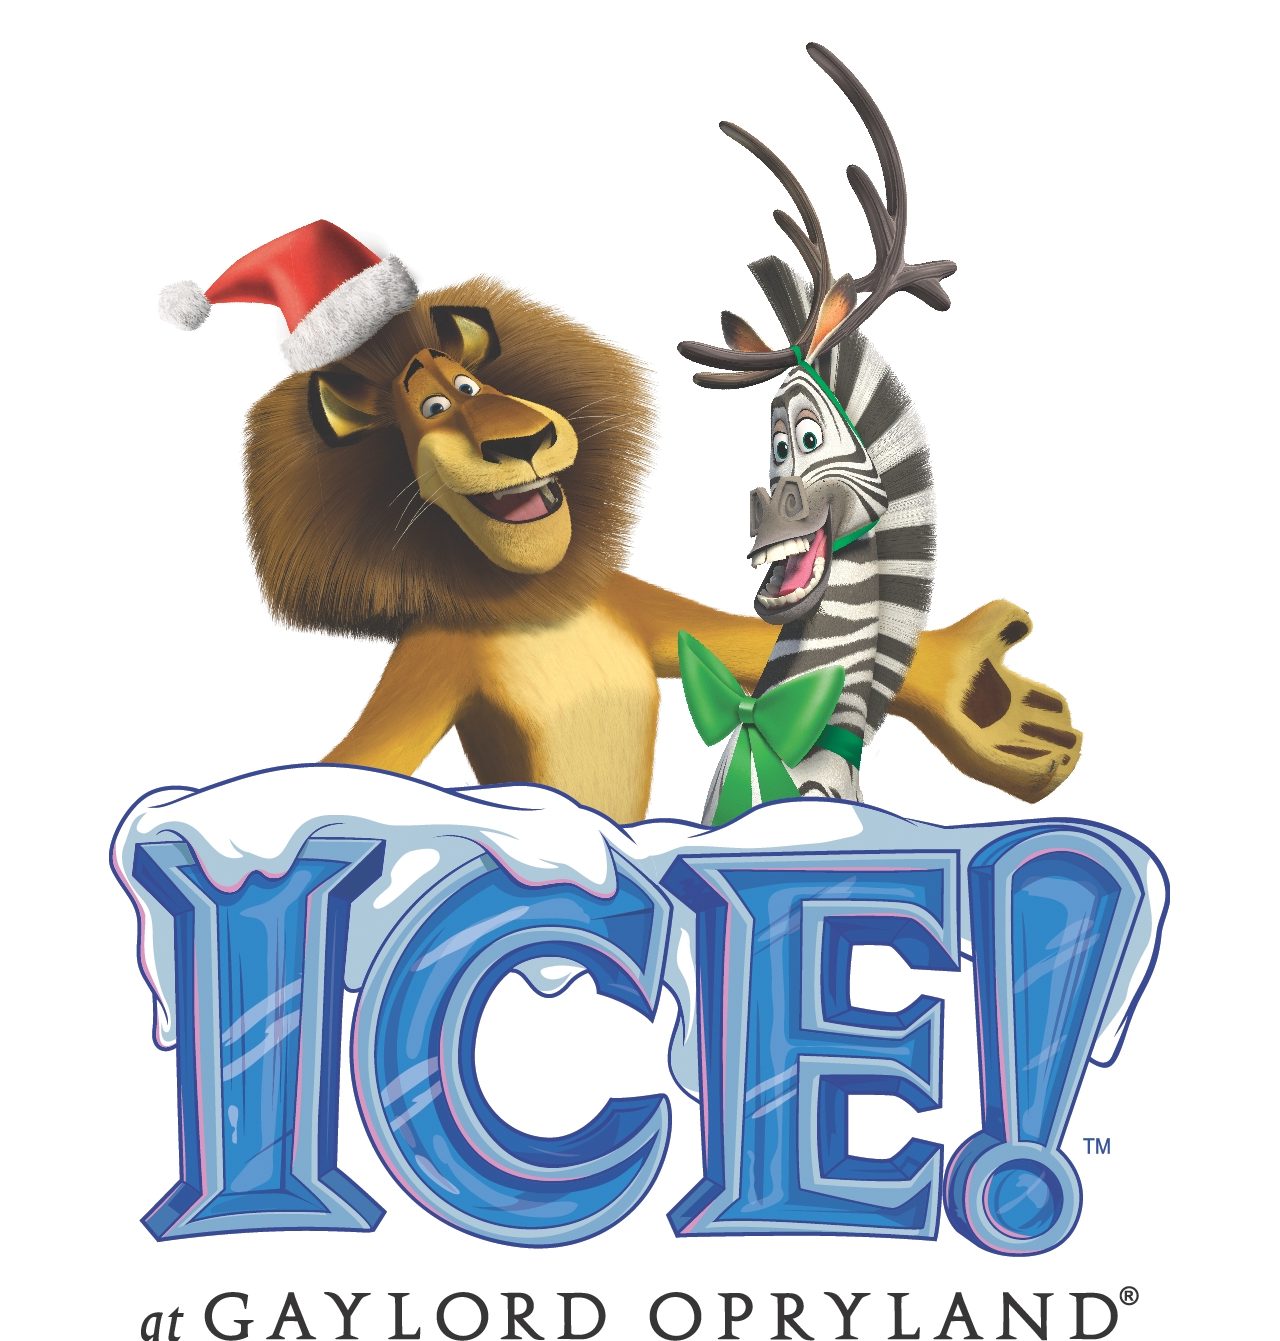 ICE! Featuring Dreamworks Merry Madagascar {review and giveaway}